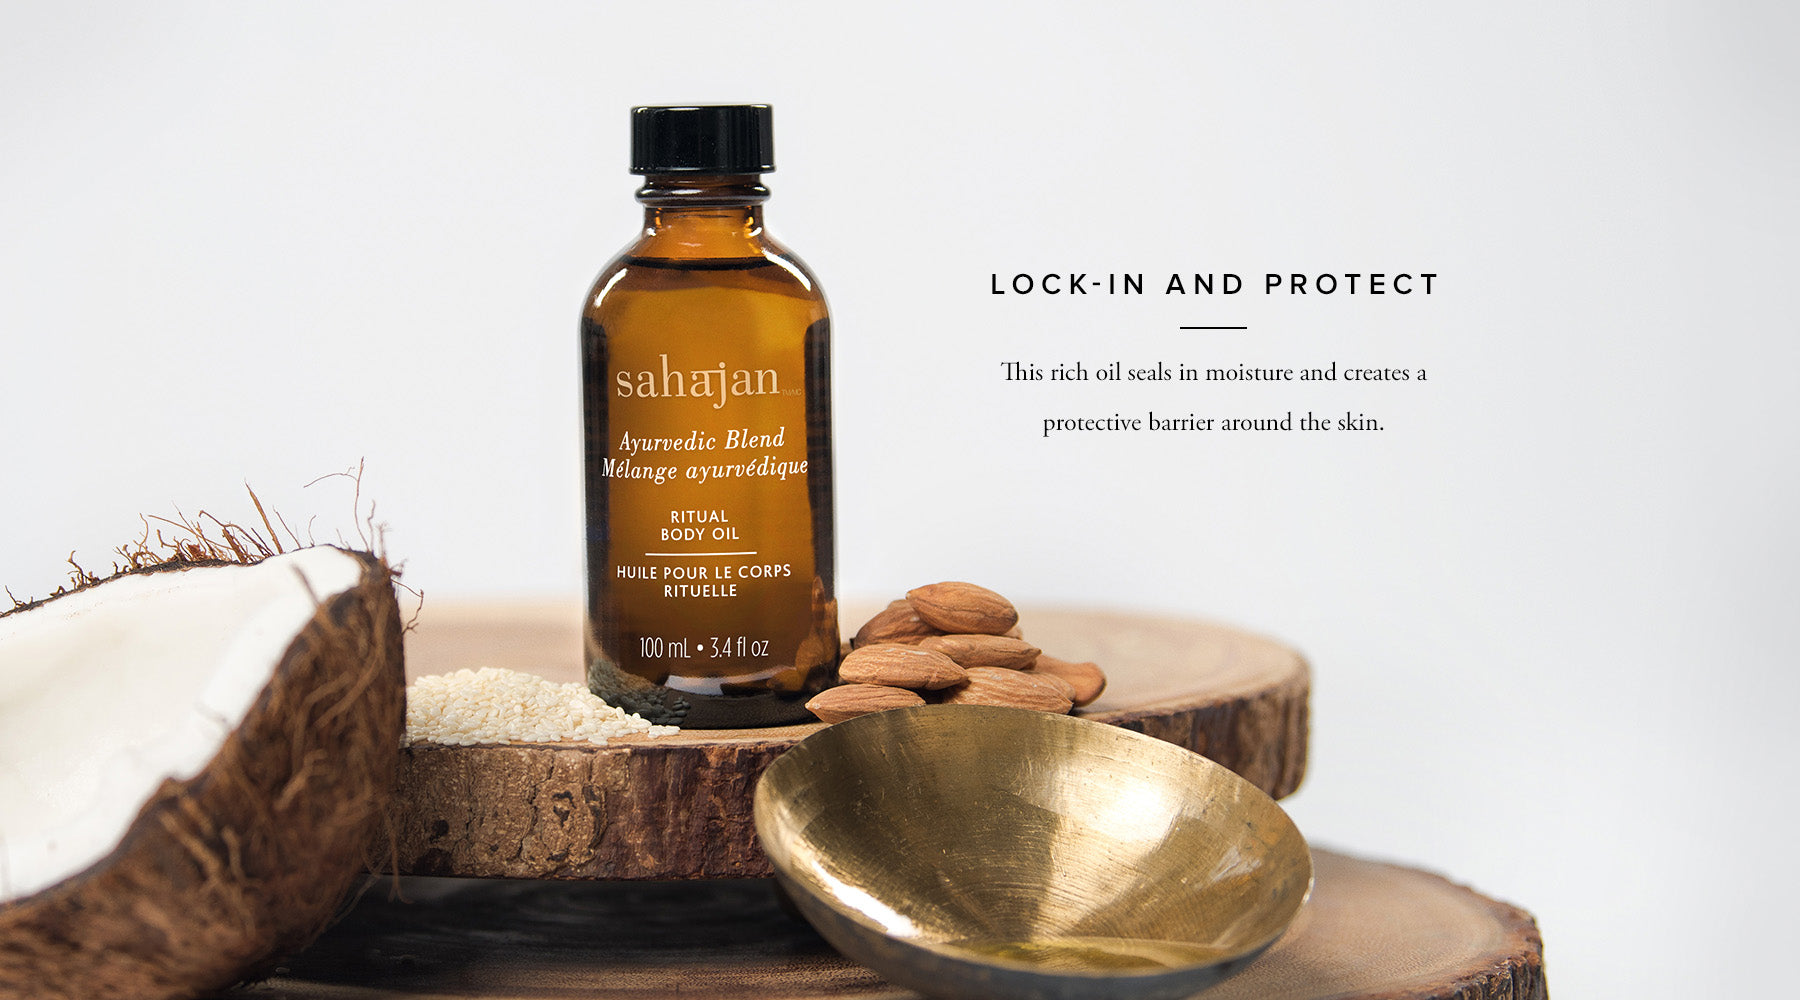 Lock-in and Protect-   This rich oil seals in moisture and creates a protective barrier around the skin